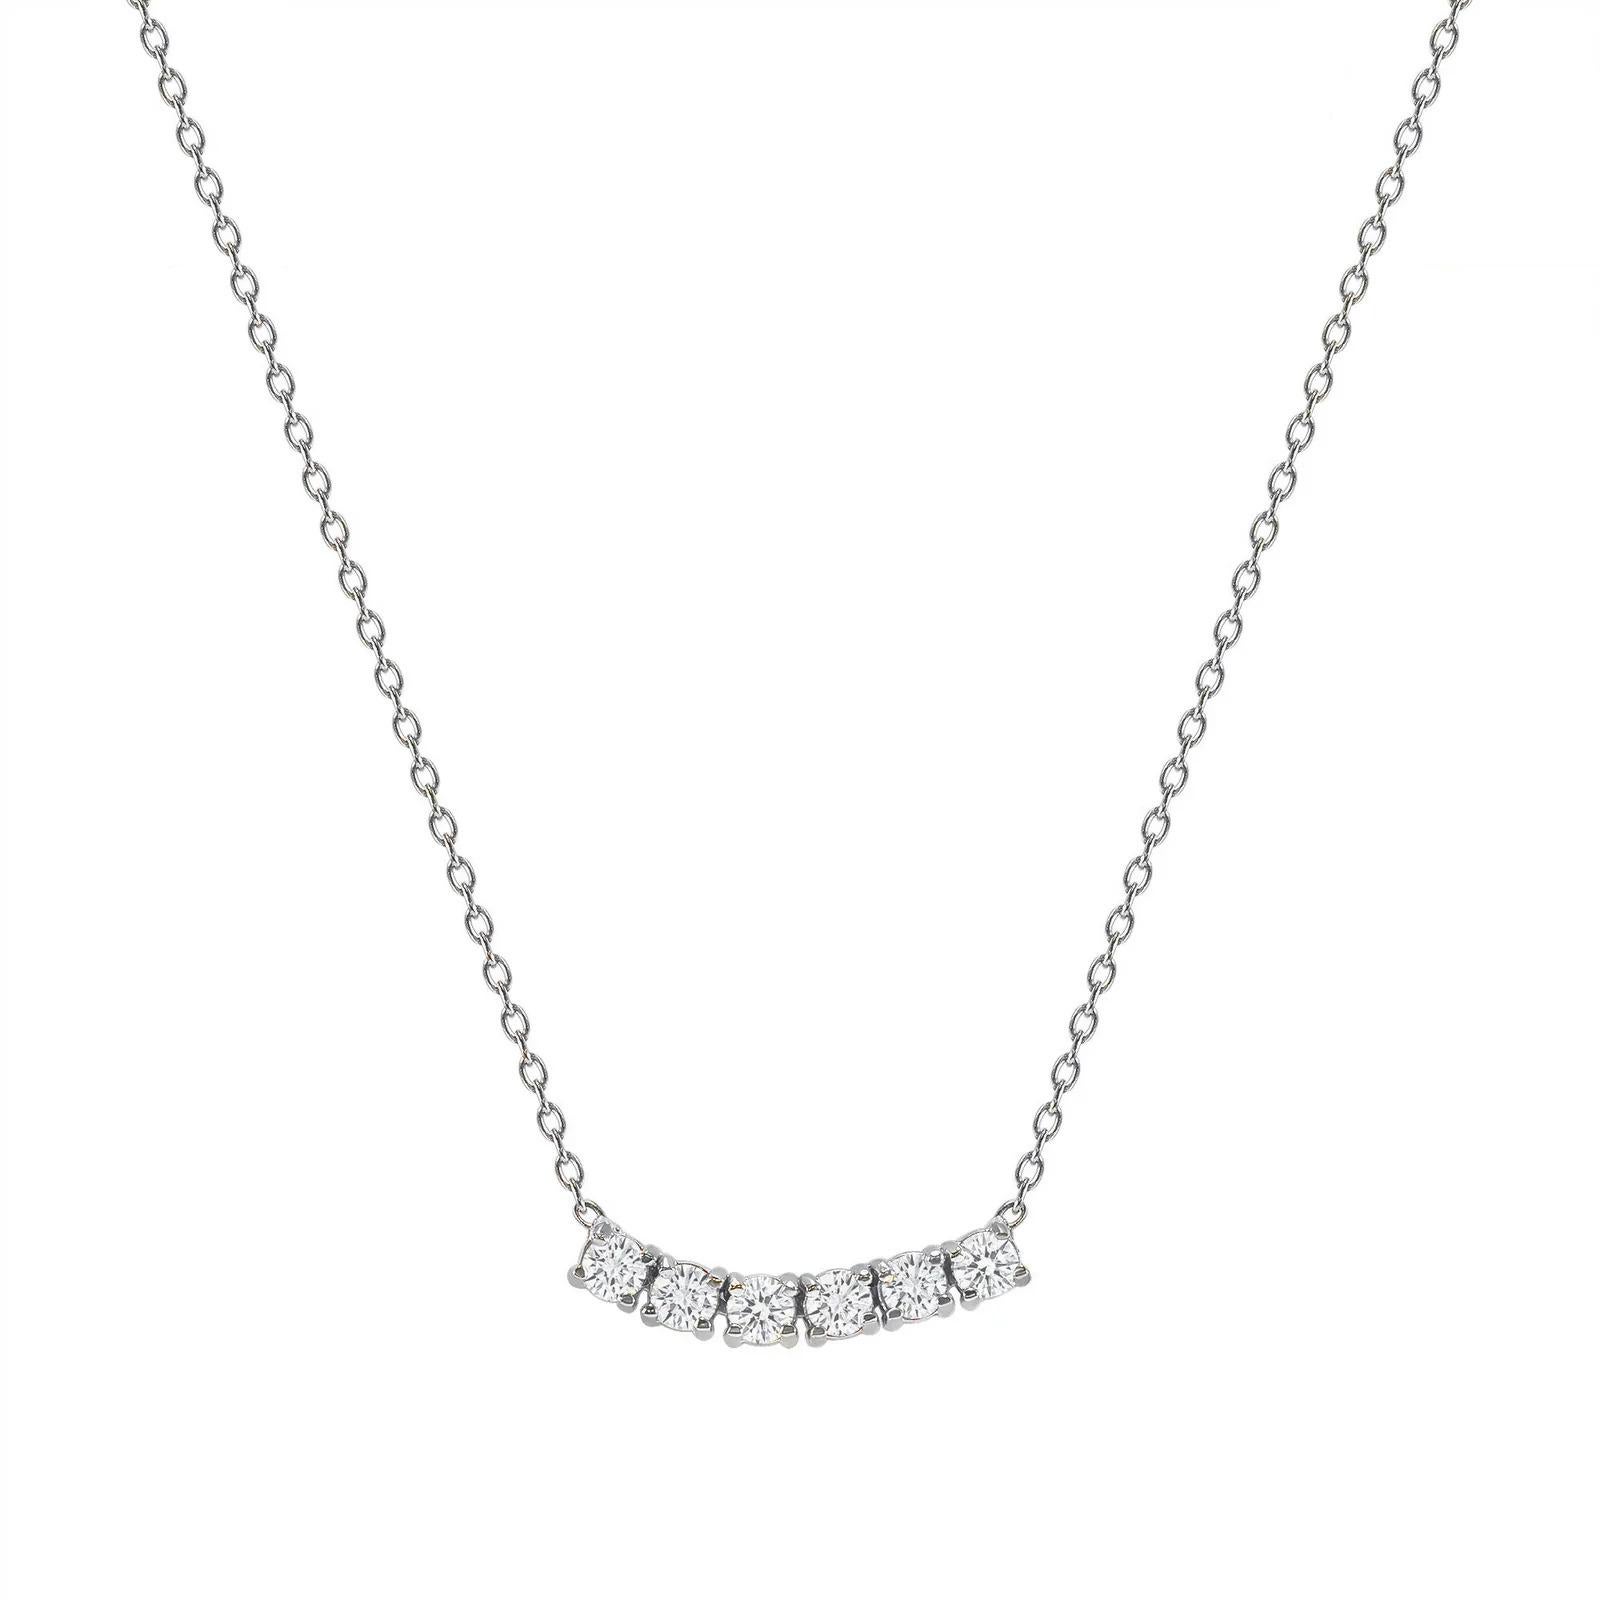 This petite, curved diamond necklace is crafted with gorgeous 14k gold set with six round diamonds.  

Gold: 14k 
Diamond Total Carats: 1ct
Diamond Cut: Round (6 diamonds)
Diamond Clarity: VS
Diamond Color: F
Color: White Gold
Necklace Length: 20